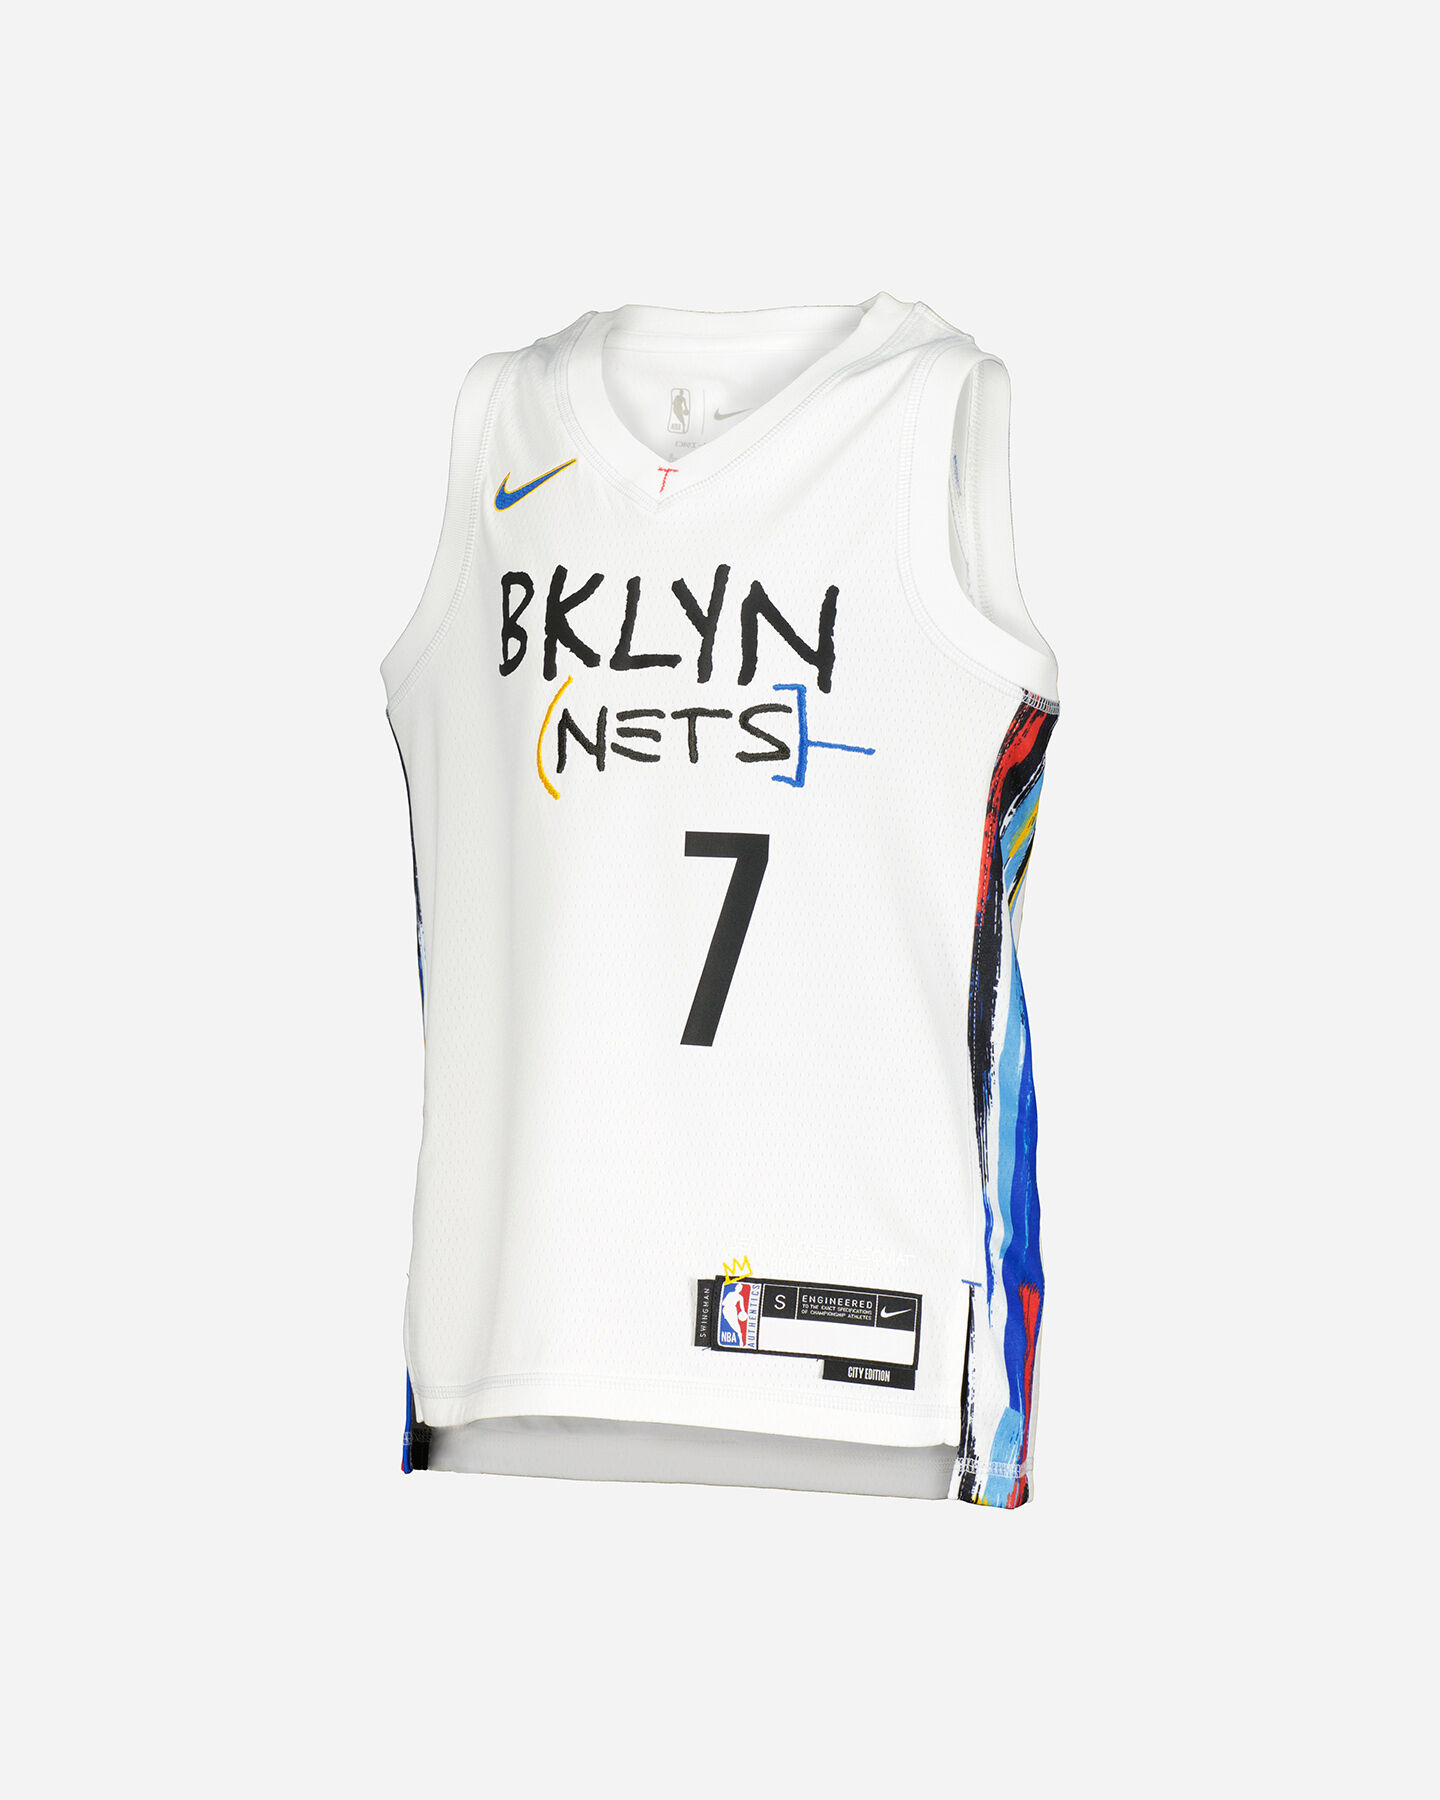  Canotta basket NIKE CITYED22 BROOKLYN DURANT KEVIN JR S4121905|000|S scatto 0